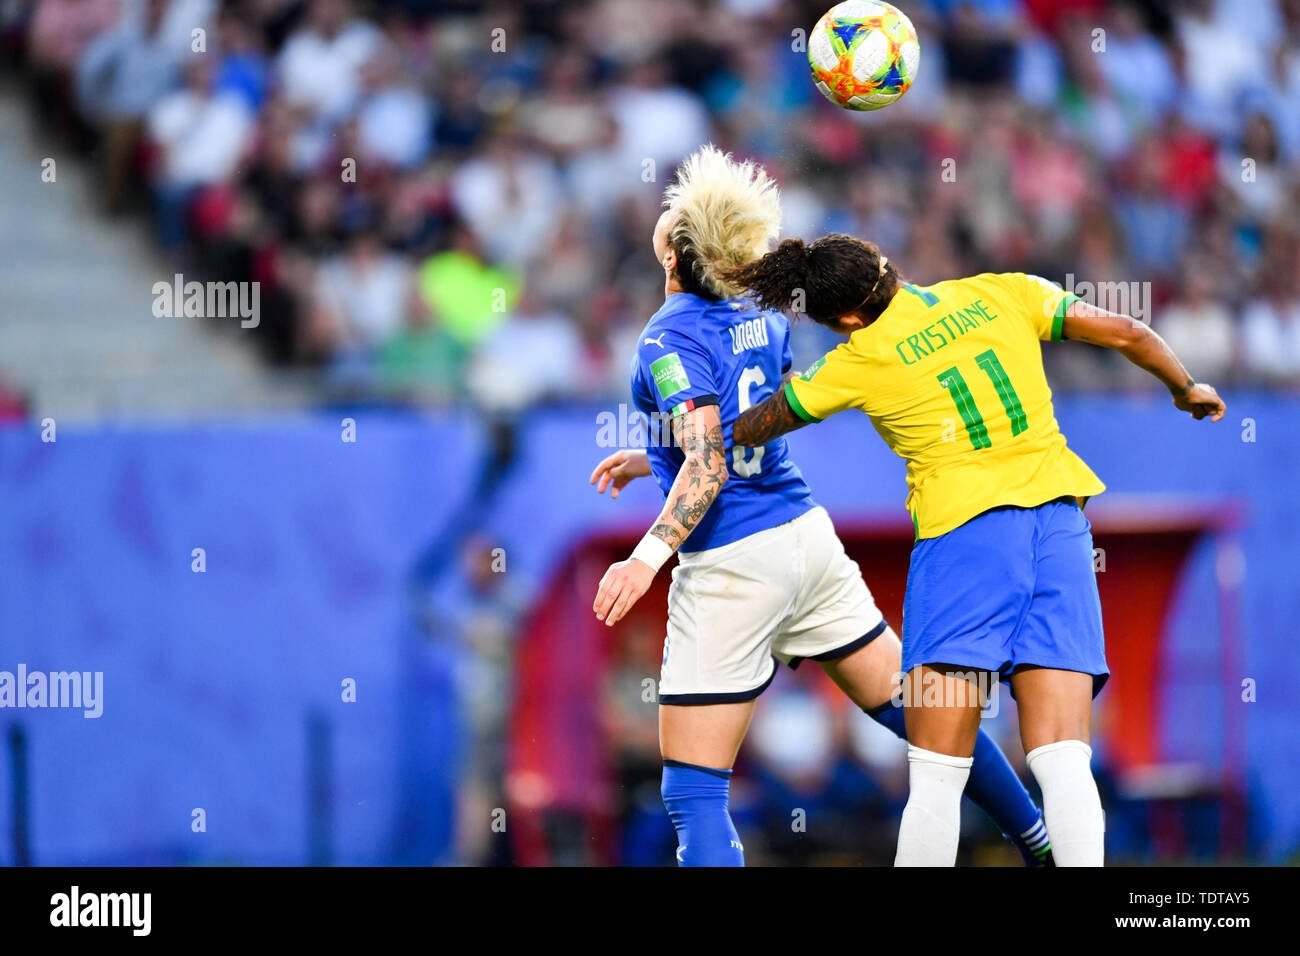 Valenciennes, Frankreich. 18th June, 2019. Head Ball, Head Duel, Game Scene, duels in the air, Action, Action Elena Linari (Italy) (5) with Cristiane (Brazil) (11), 18.06.2019, Valenciennes (France), Football, FIFA Women's World Cup 2019, Italy - Brazil, FIFA REGULATIONS PROHIBIT ANY USE OF PHOTOGRAPHS AS IMAGE SEQUENCES AND/OR QUASI VIDEO. | usage worldwide Credit: dpa/Alamy Live News Stock Photo